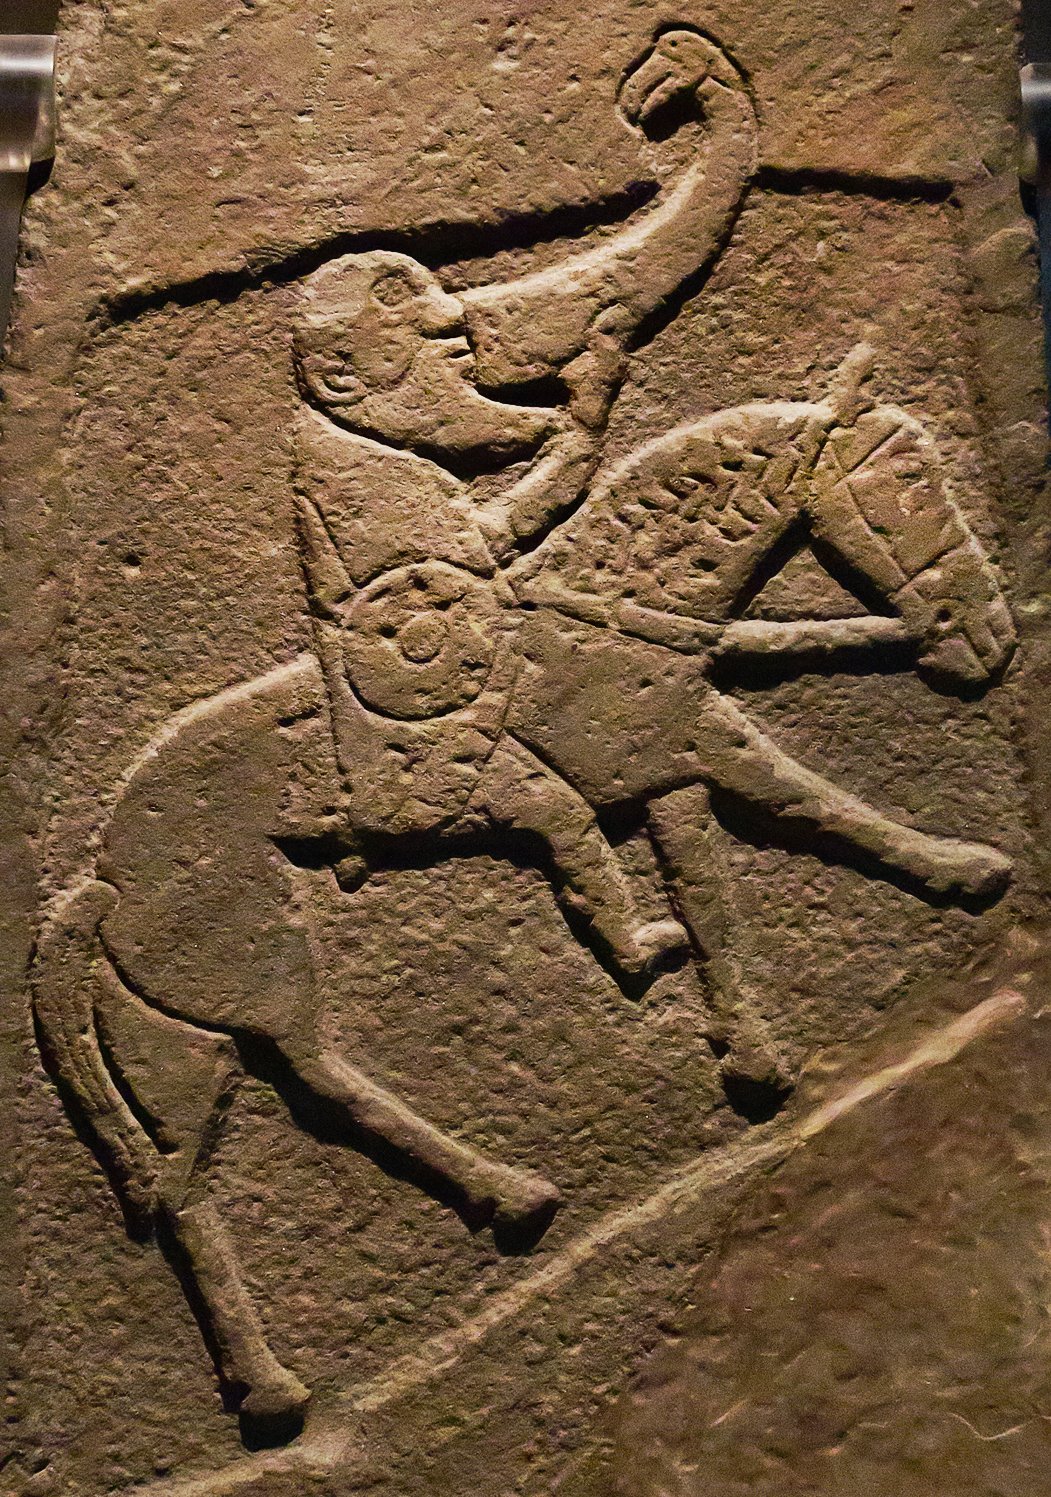 A carved stone slab showing a Pictish warrior on a horse. He has a bald head, a long beard. He drinks from a large horn that has a bird’s head at the end. The stone is dark gray and has some cracks.